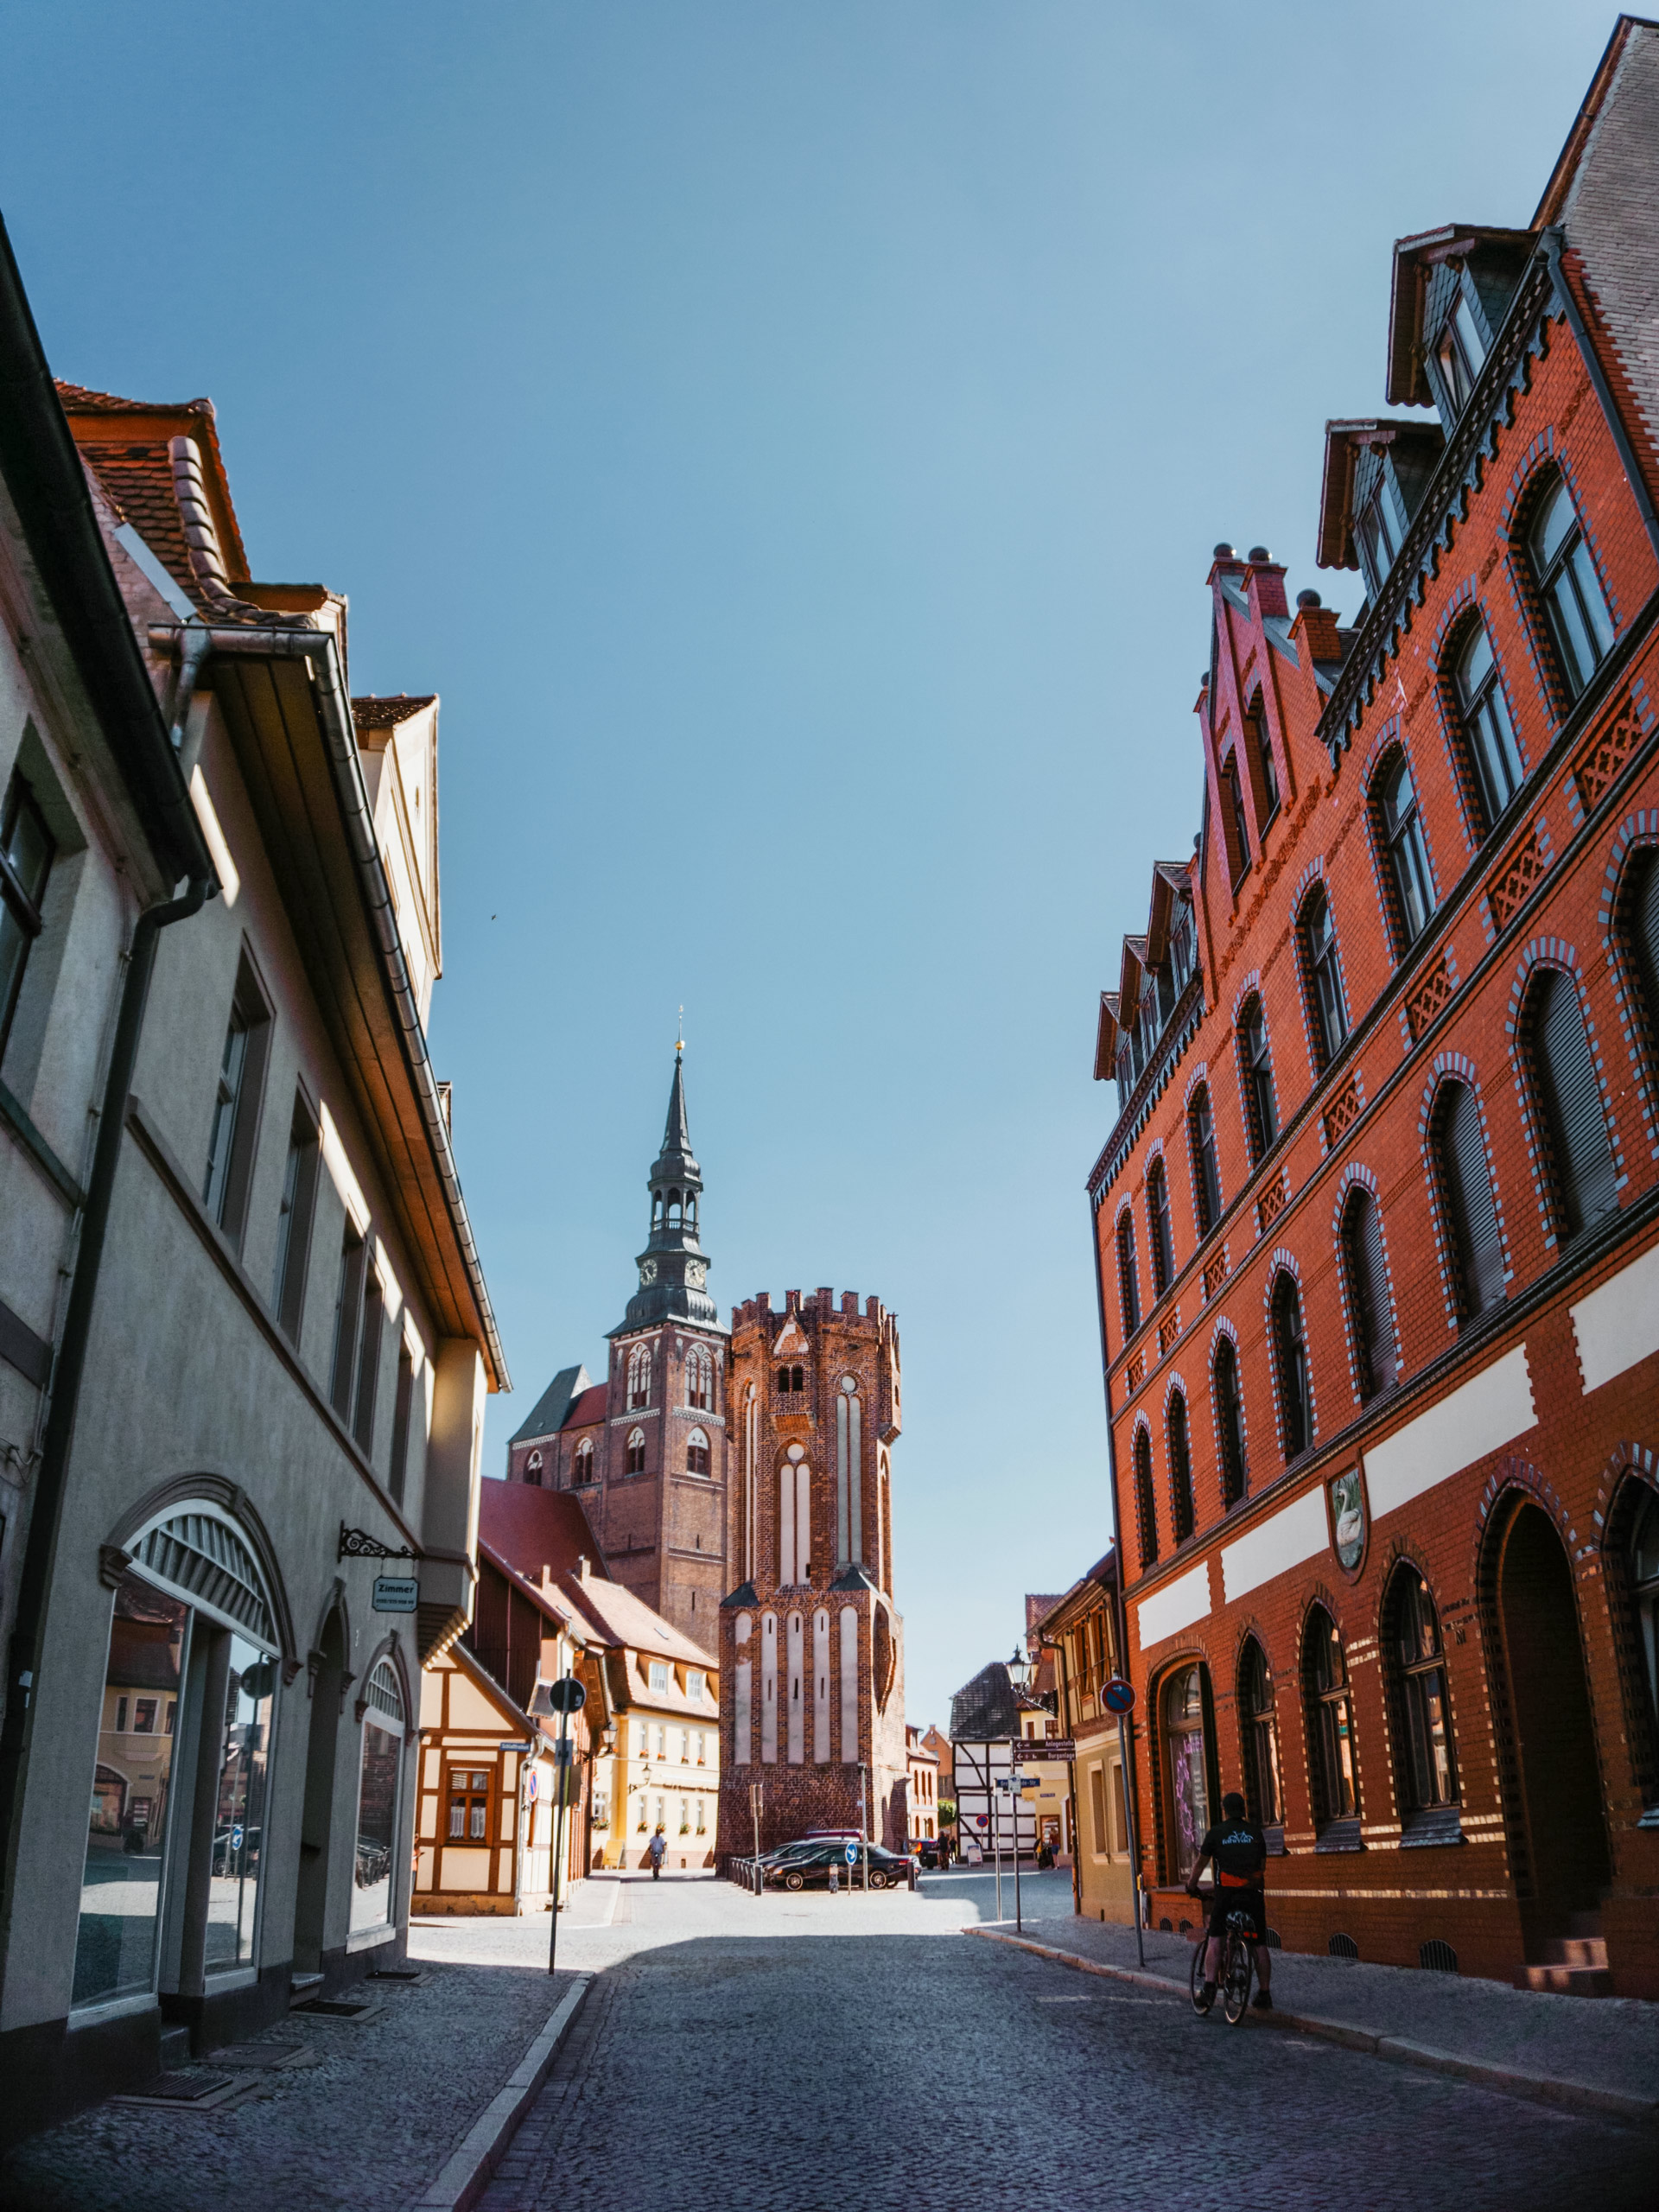 Tangermünde historic city filled with red brick buildings